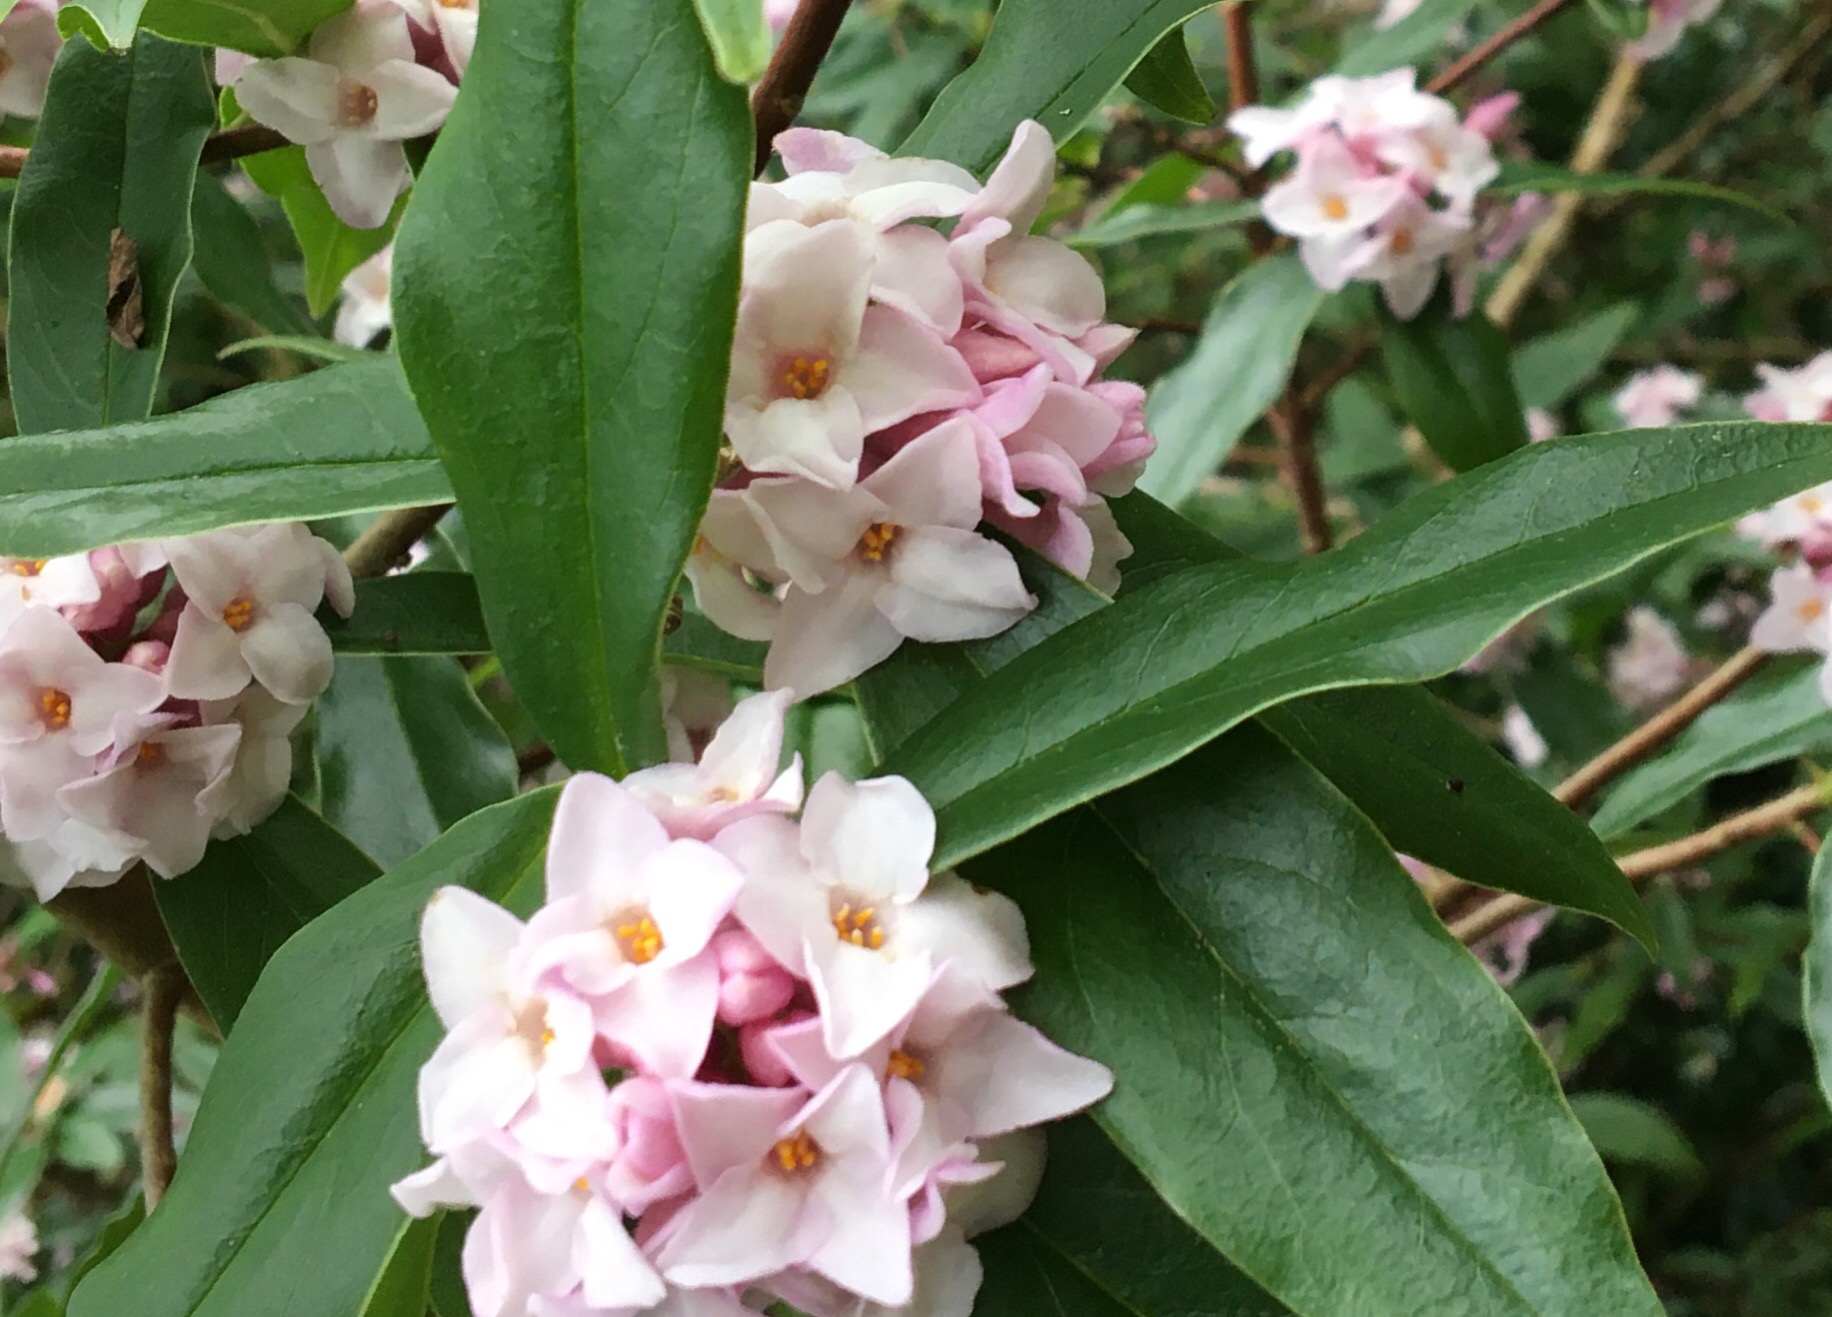 Clusters of pink flowers of Daphne